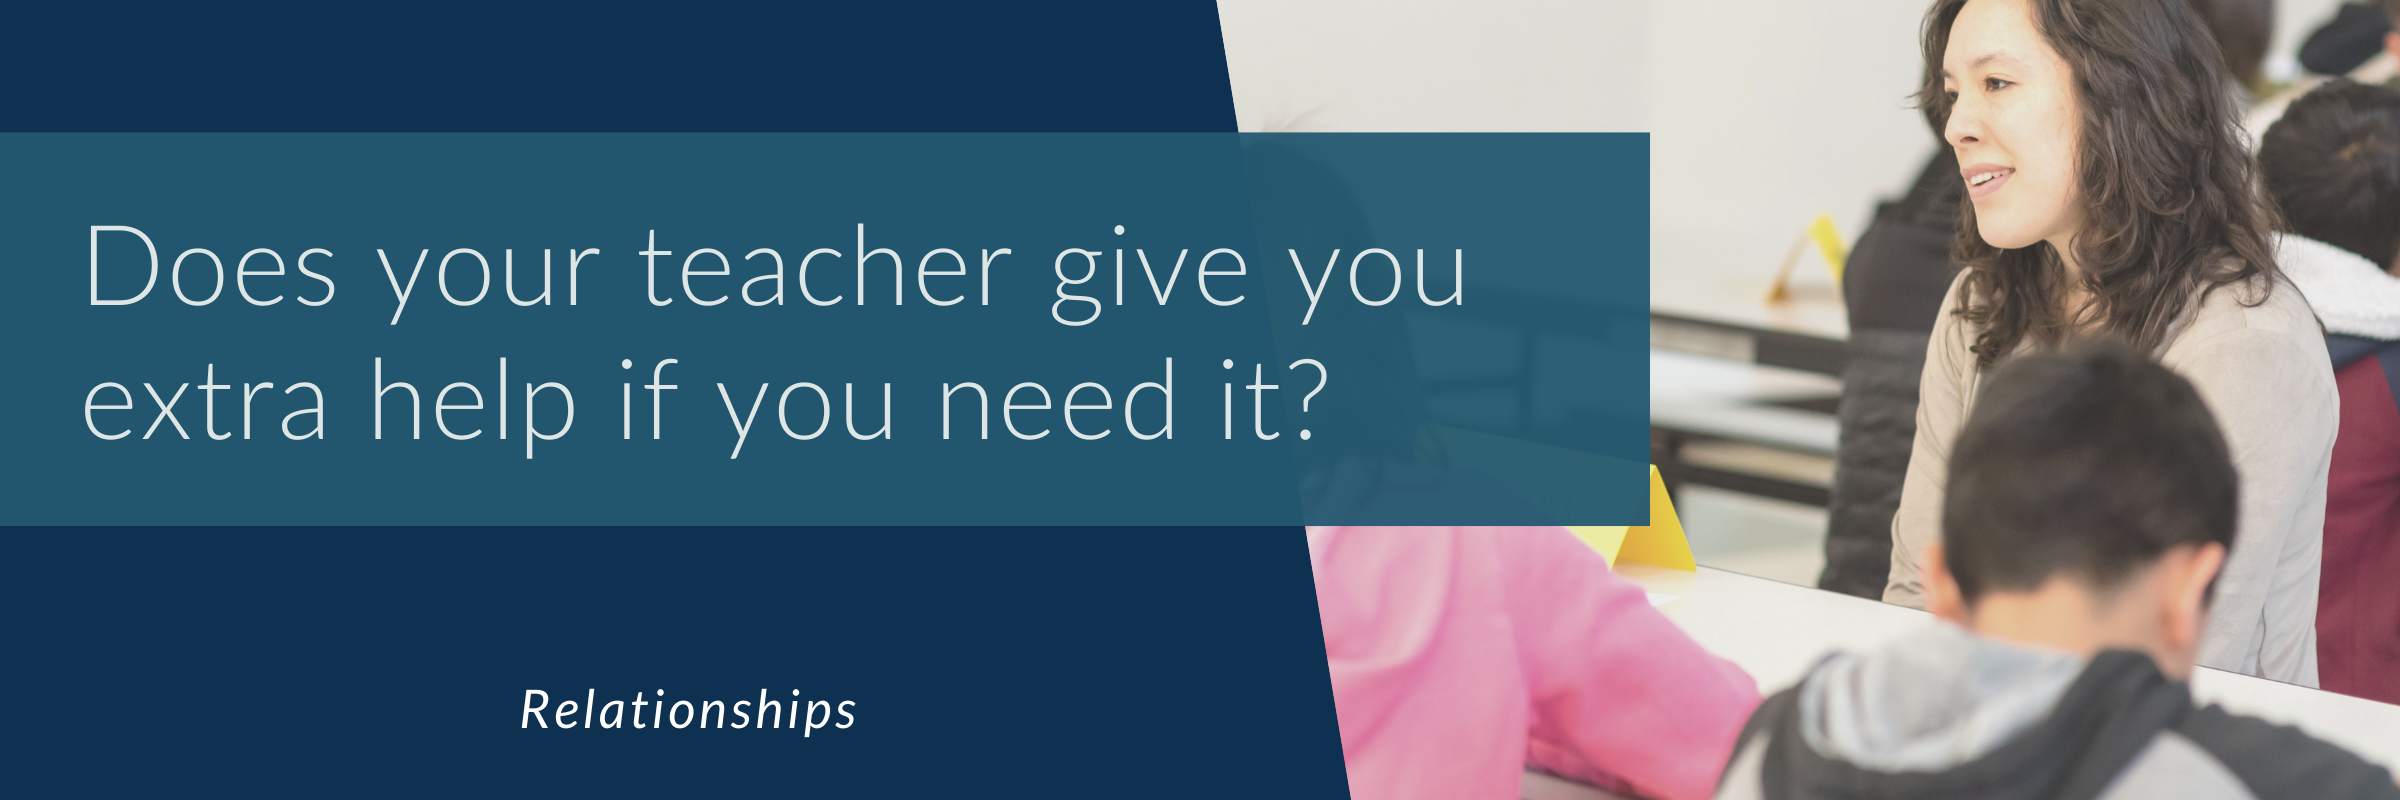 Does your teacher give you extra help if you need it?